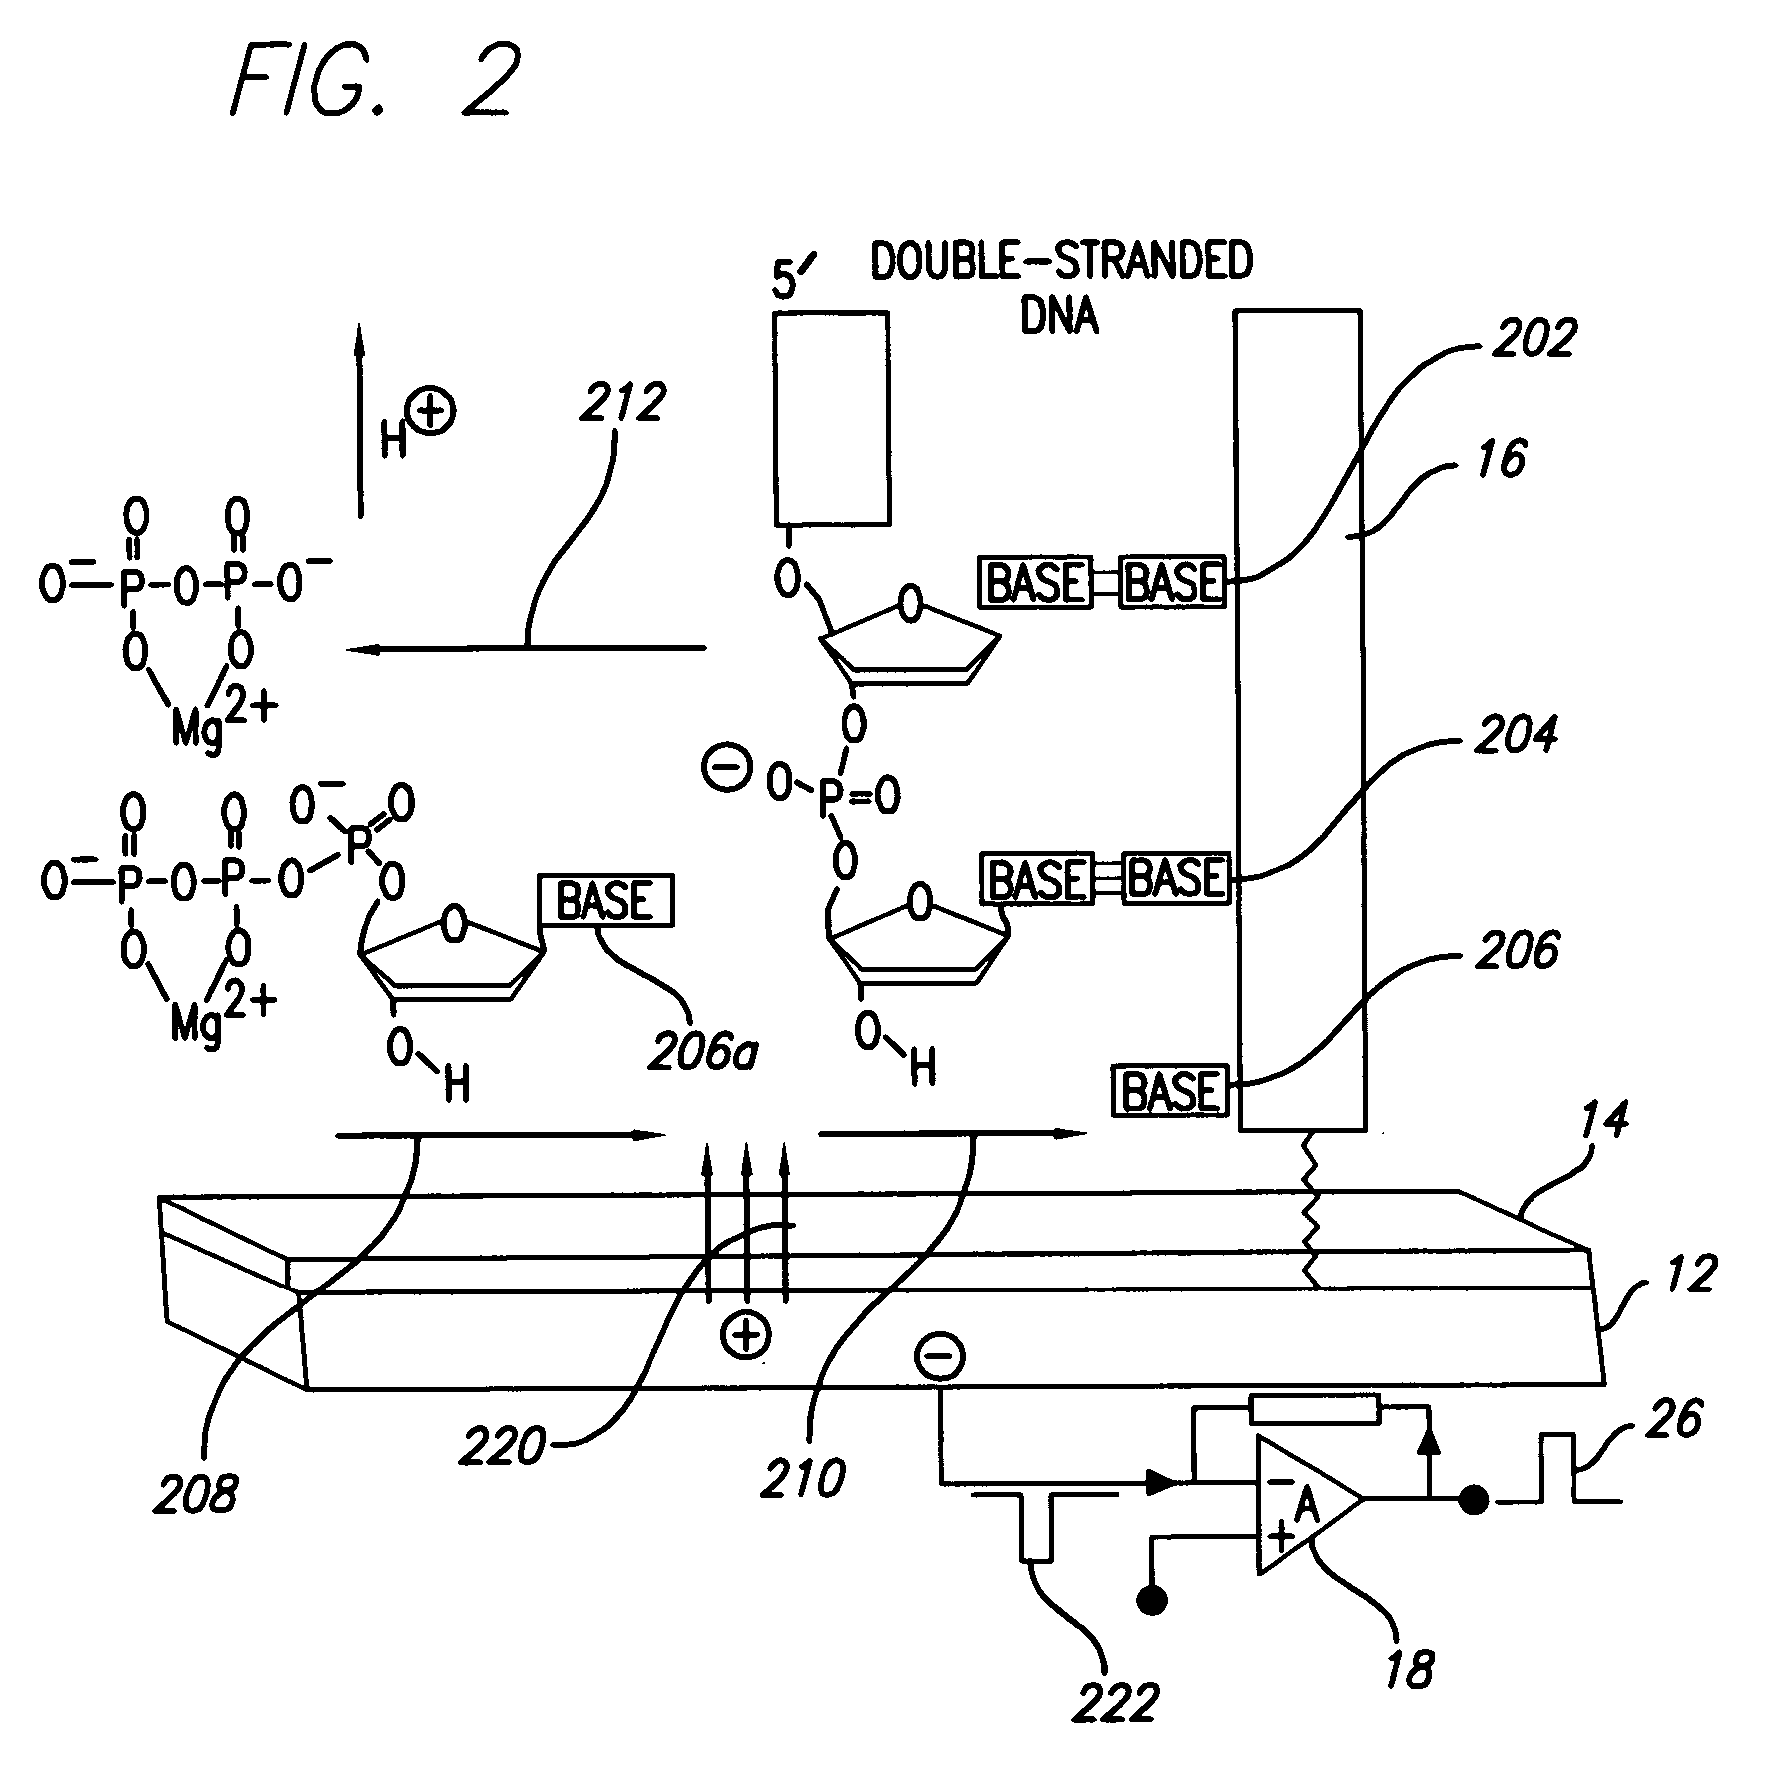 Charge perturbation detection system for DNA and other molecules